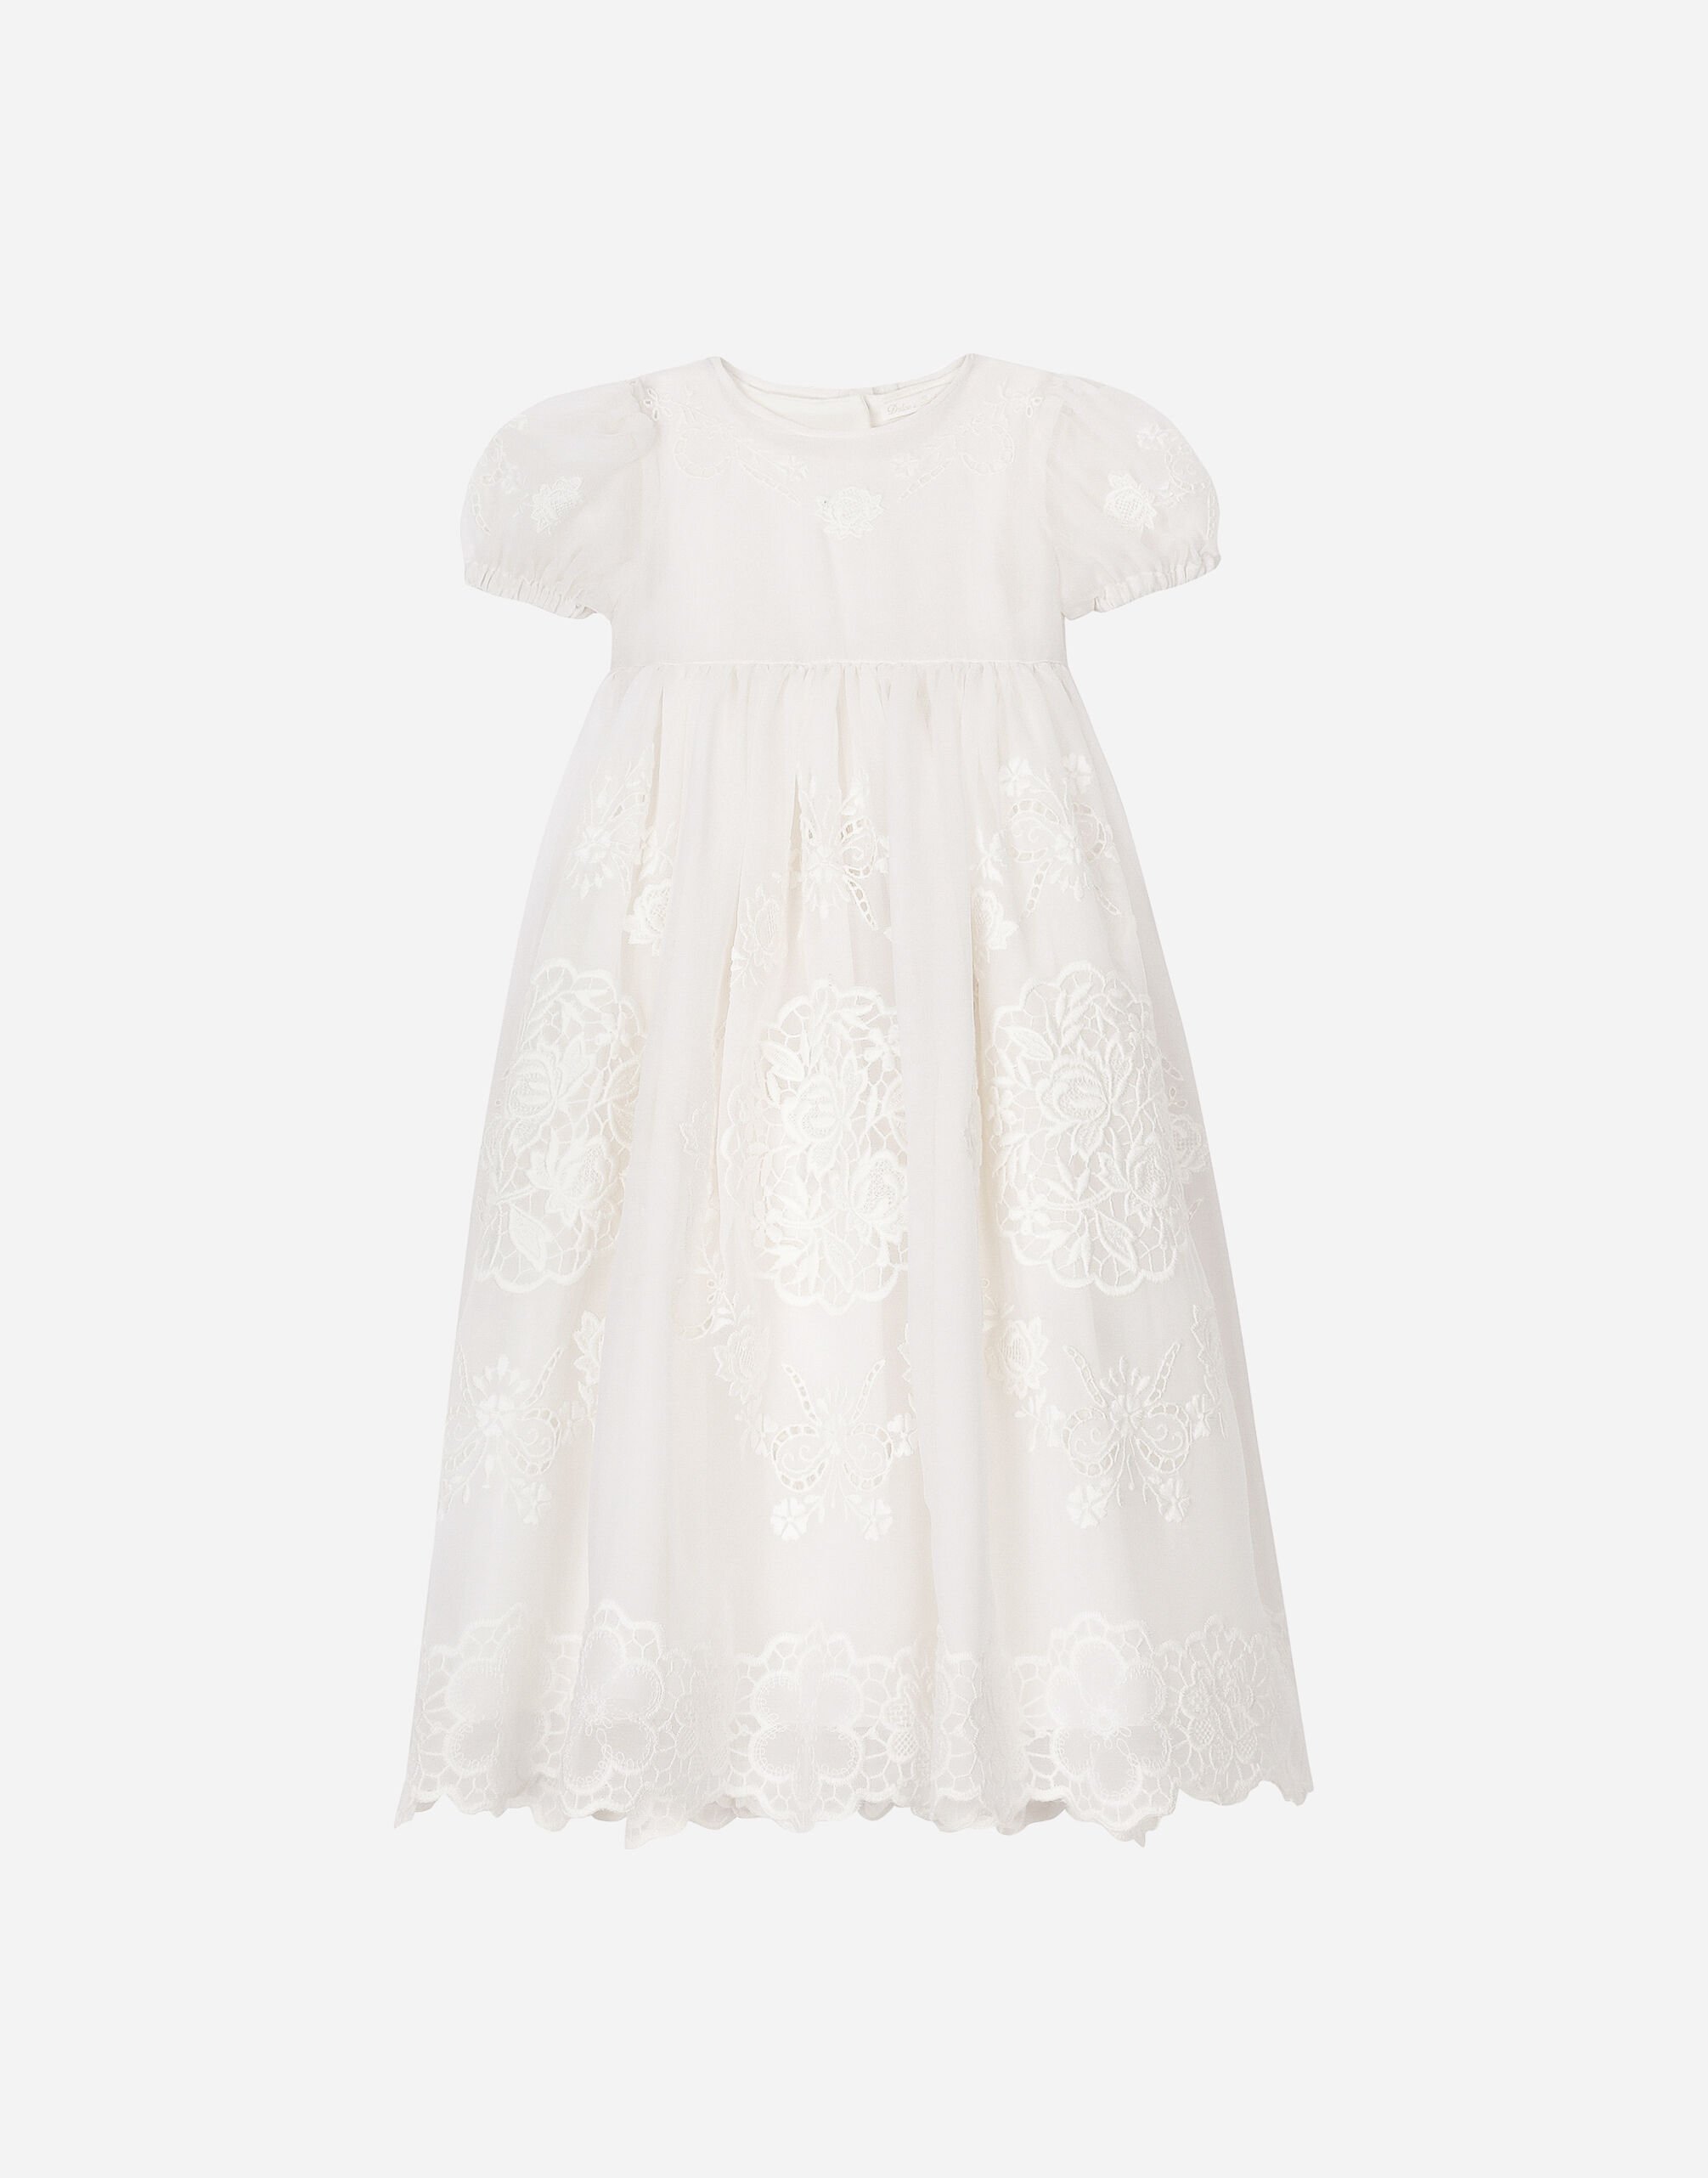 Dolce & Gabbana Empire-line embroidered chiffon christening dress with short sleeves Black LB1A58G0U05